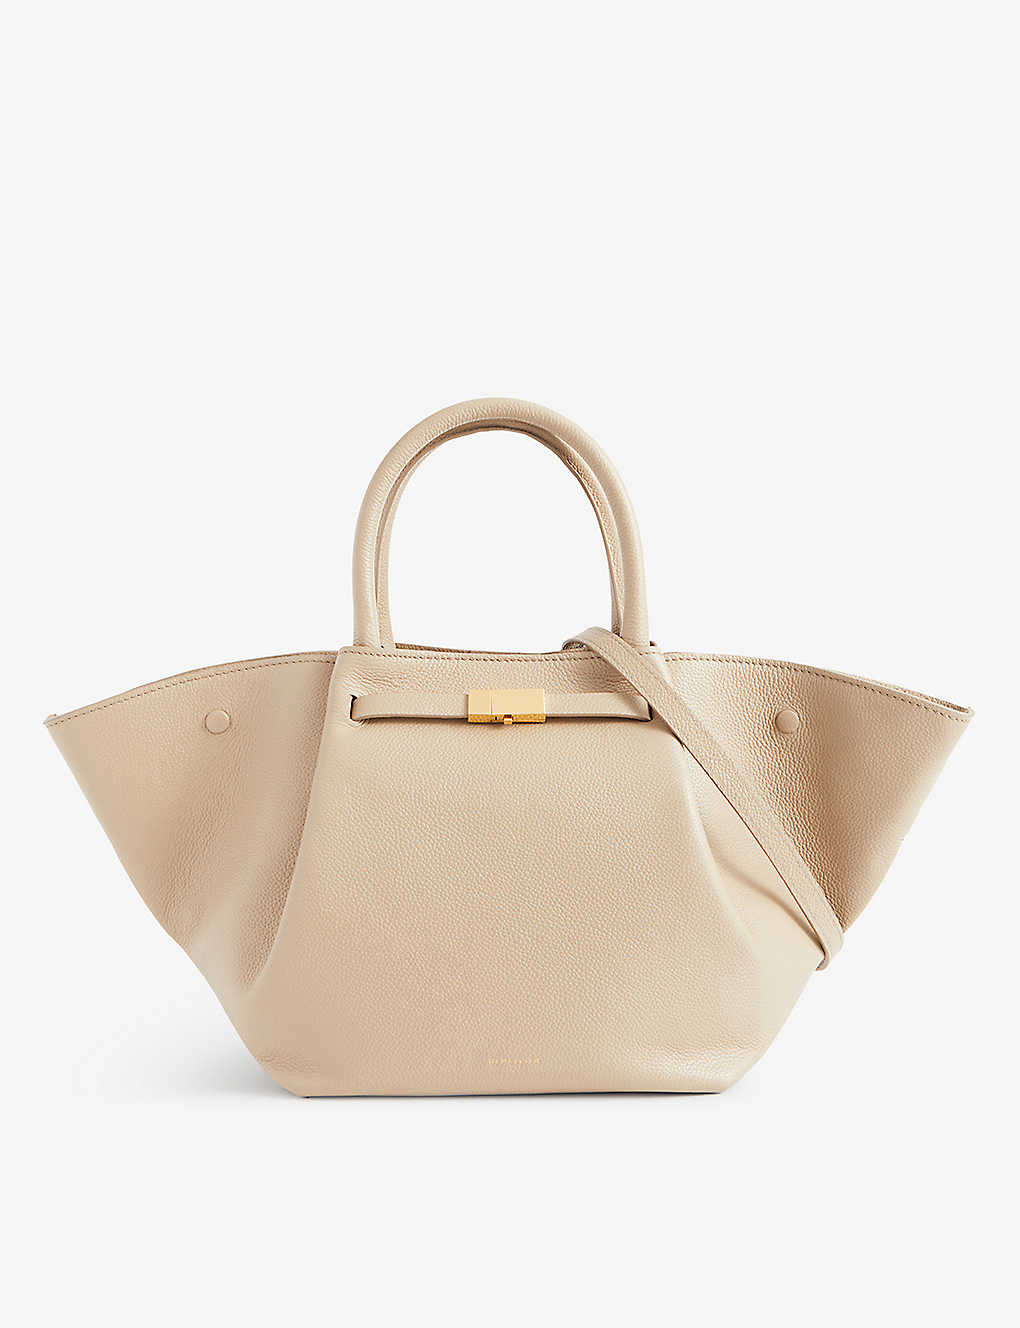 DEMELLIER DEMELLIER WOMEN'S TAUPE THE MIDI NEW YORK LEATHER TOTE BAG